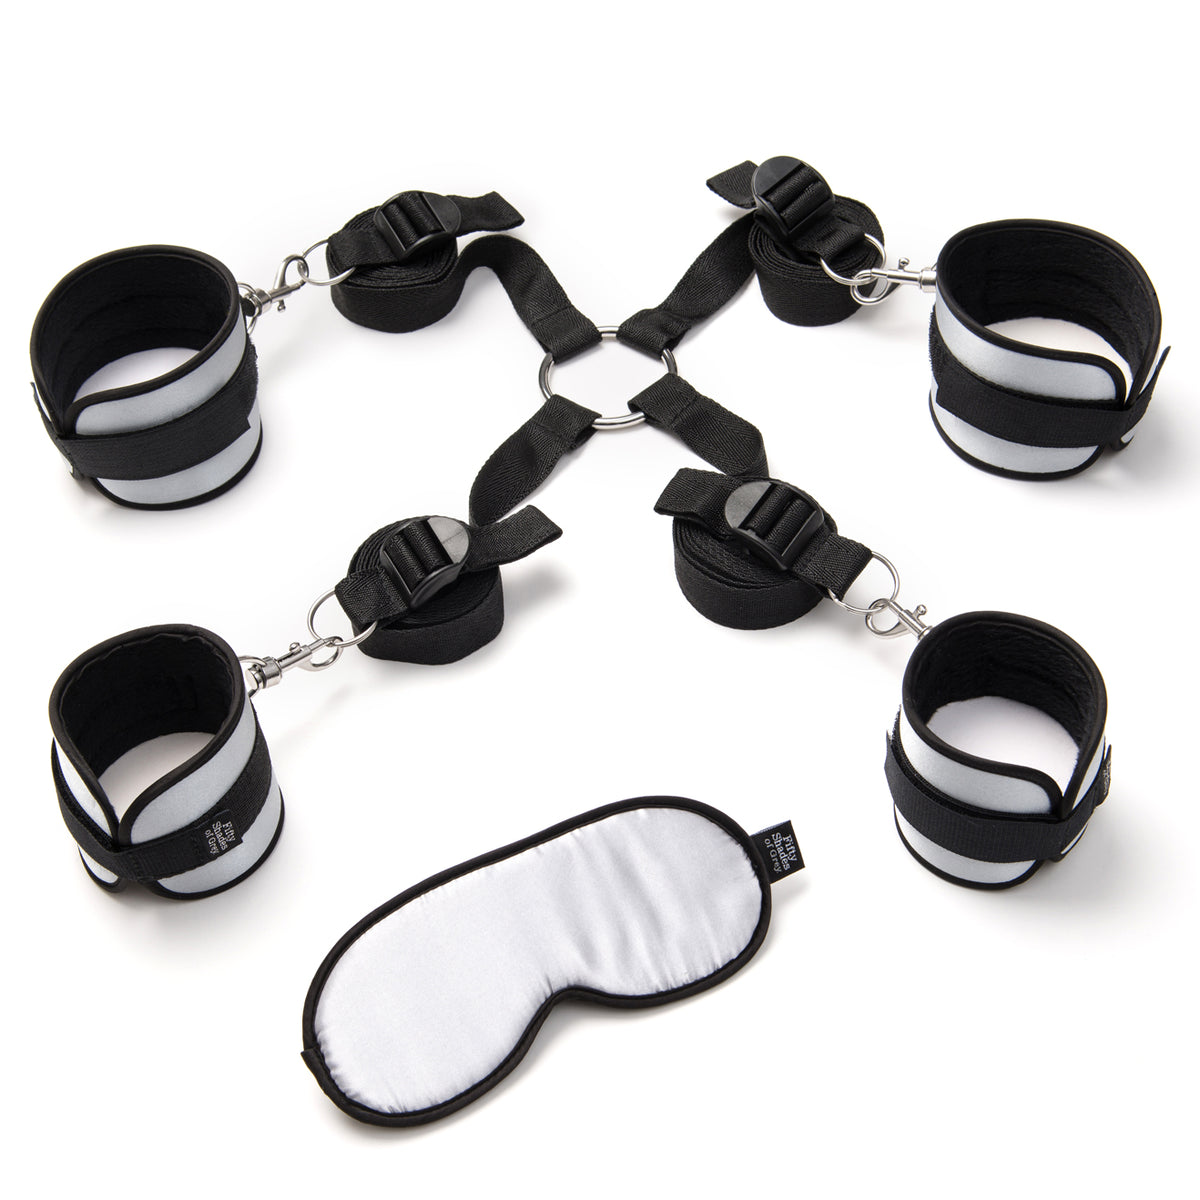 Fifty Shades of Grey® Hard Limits Bed Restraint Kit